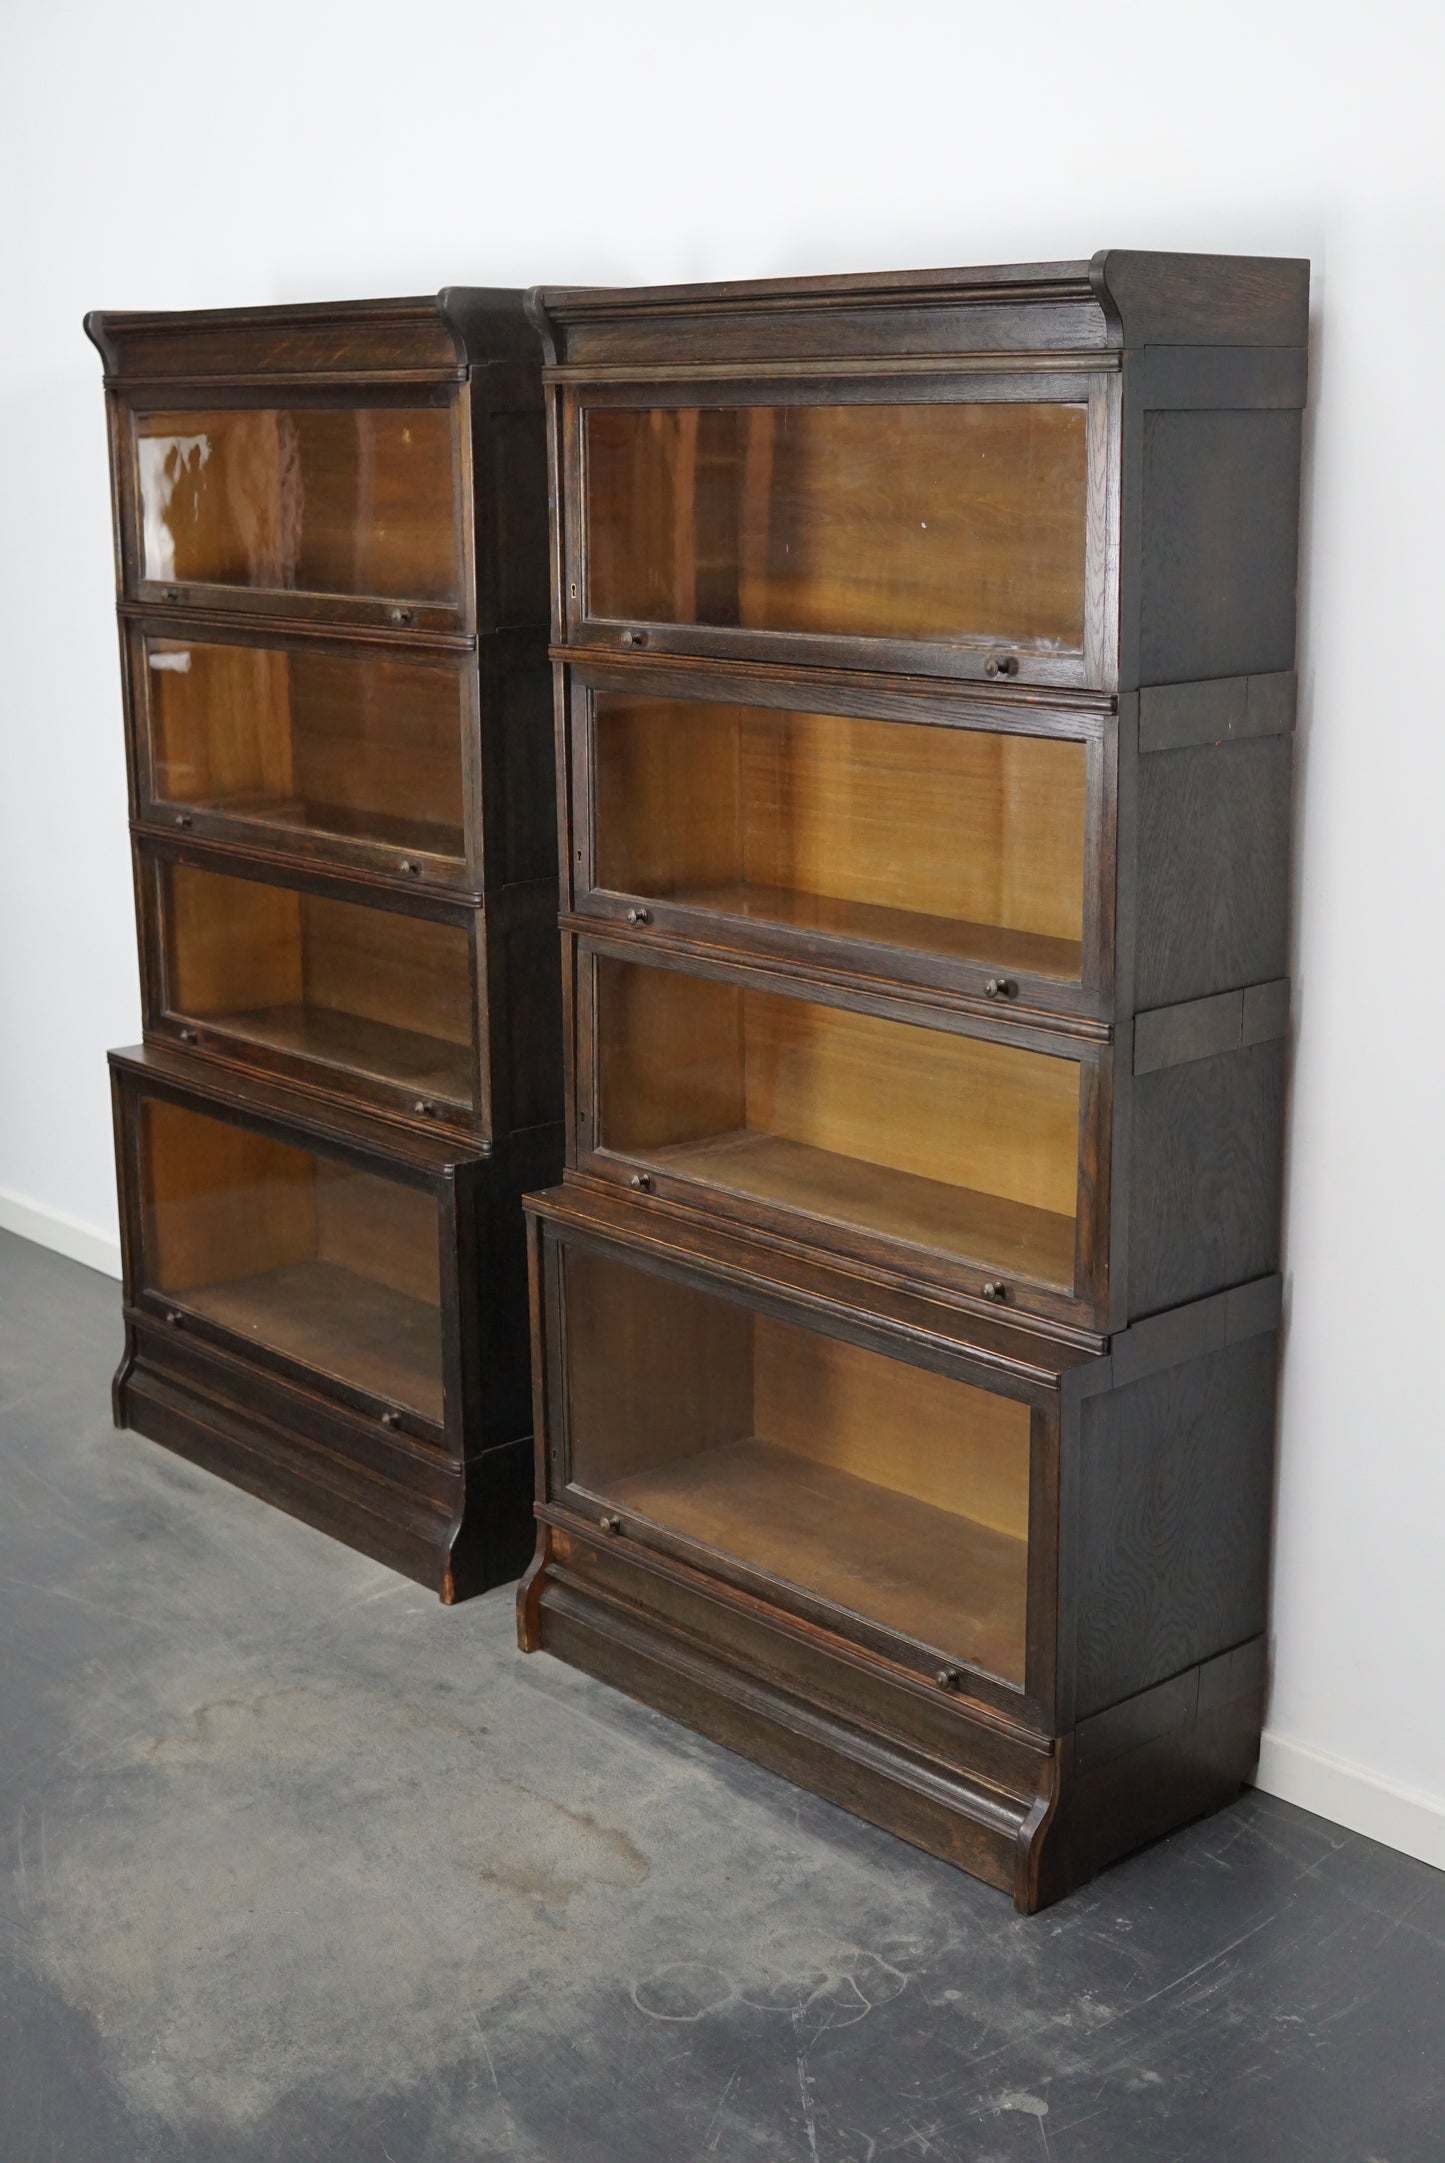 Pair of Antique Oak Stacking Bookcases by Muller in Globe Wernicke Style ca 1930